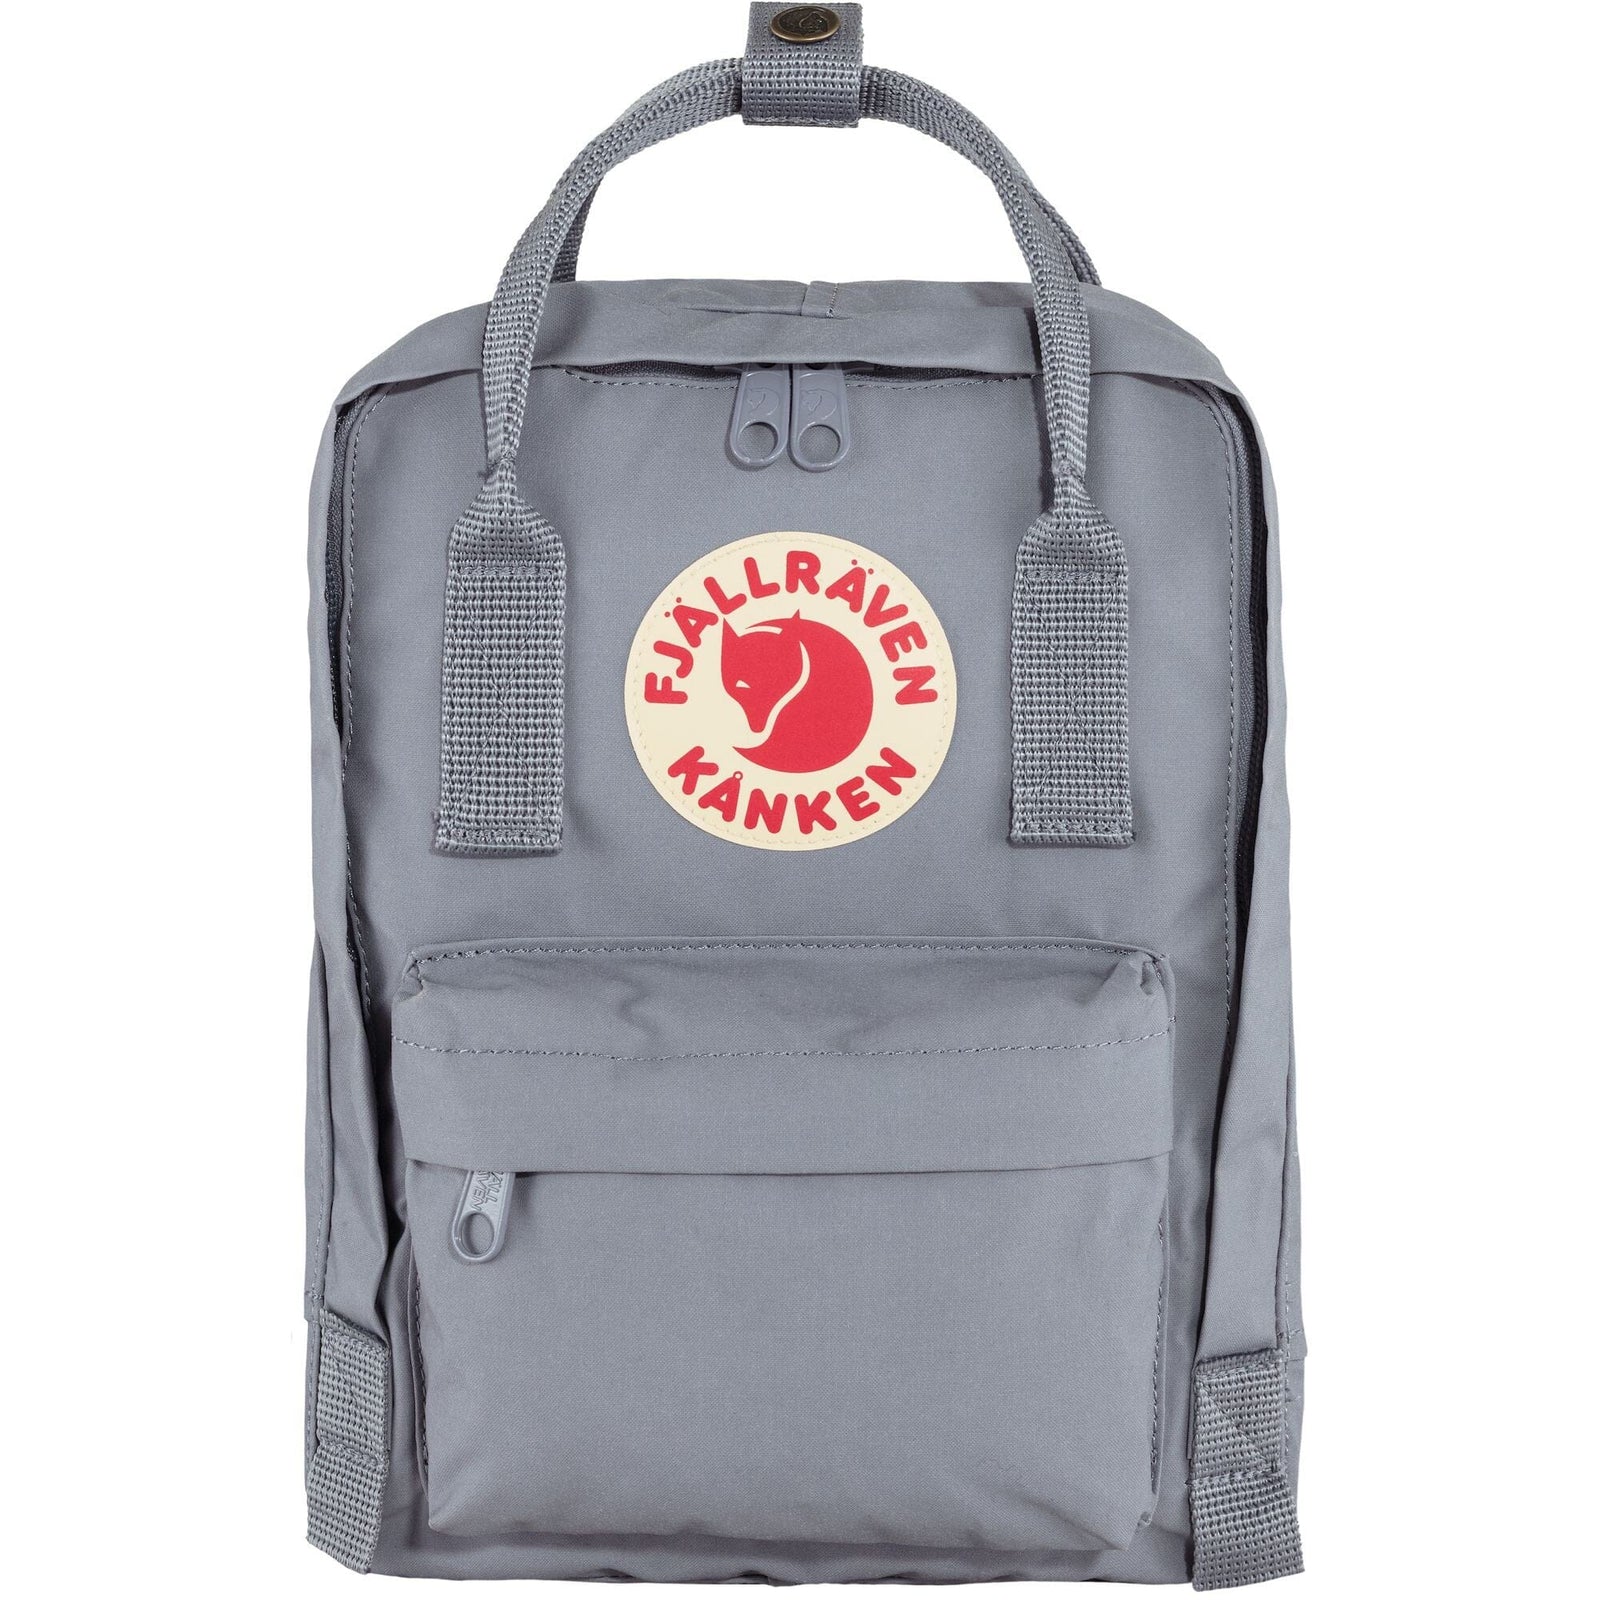 Fjallraven Canada - Backpacks, Clothing, Gear & More